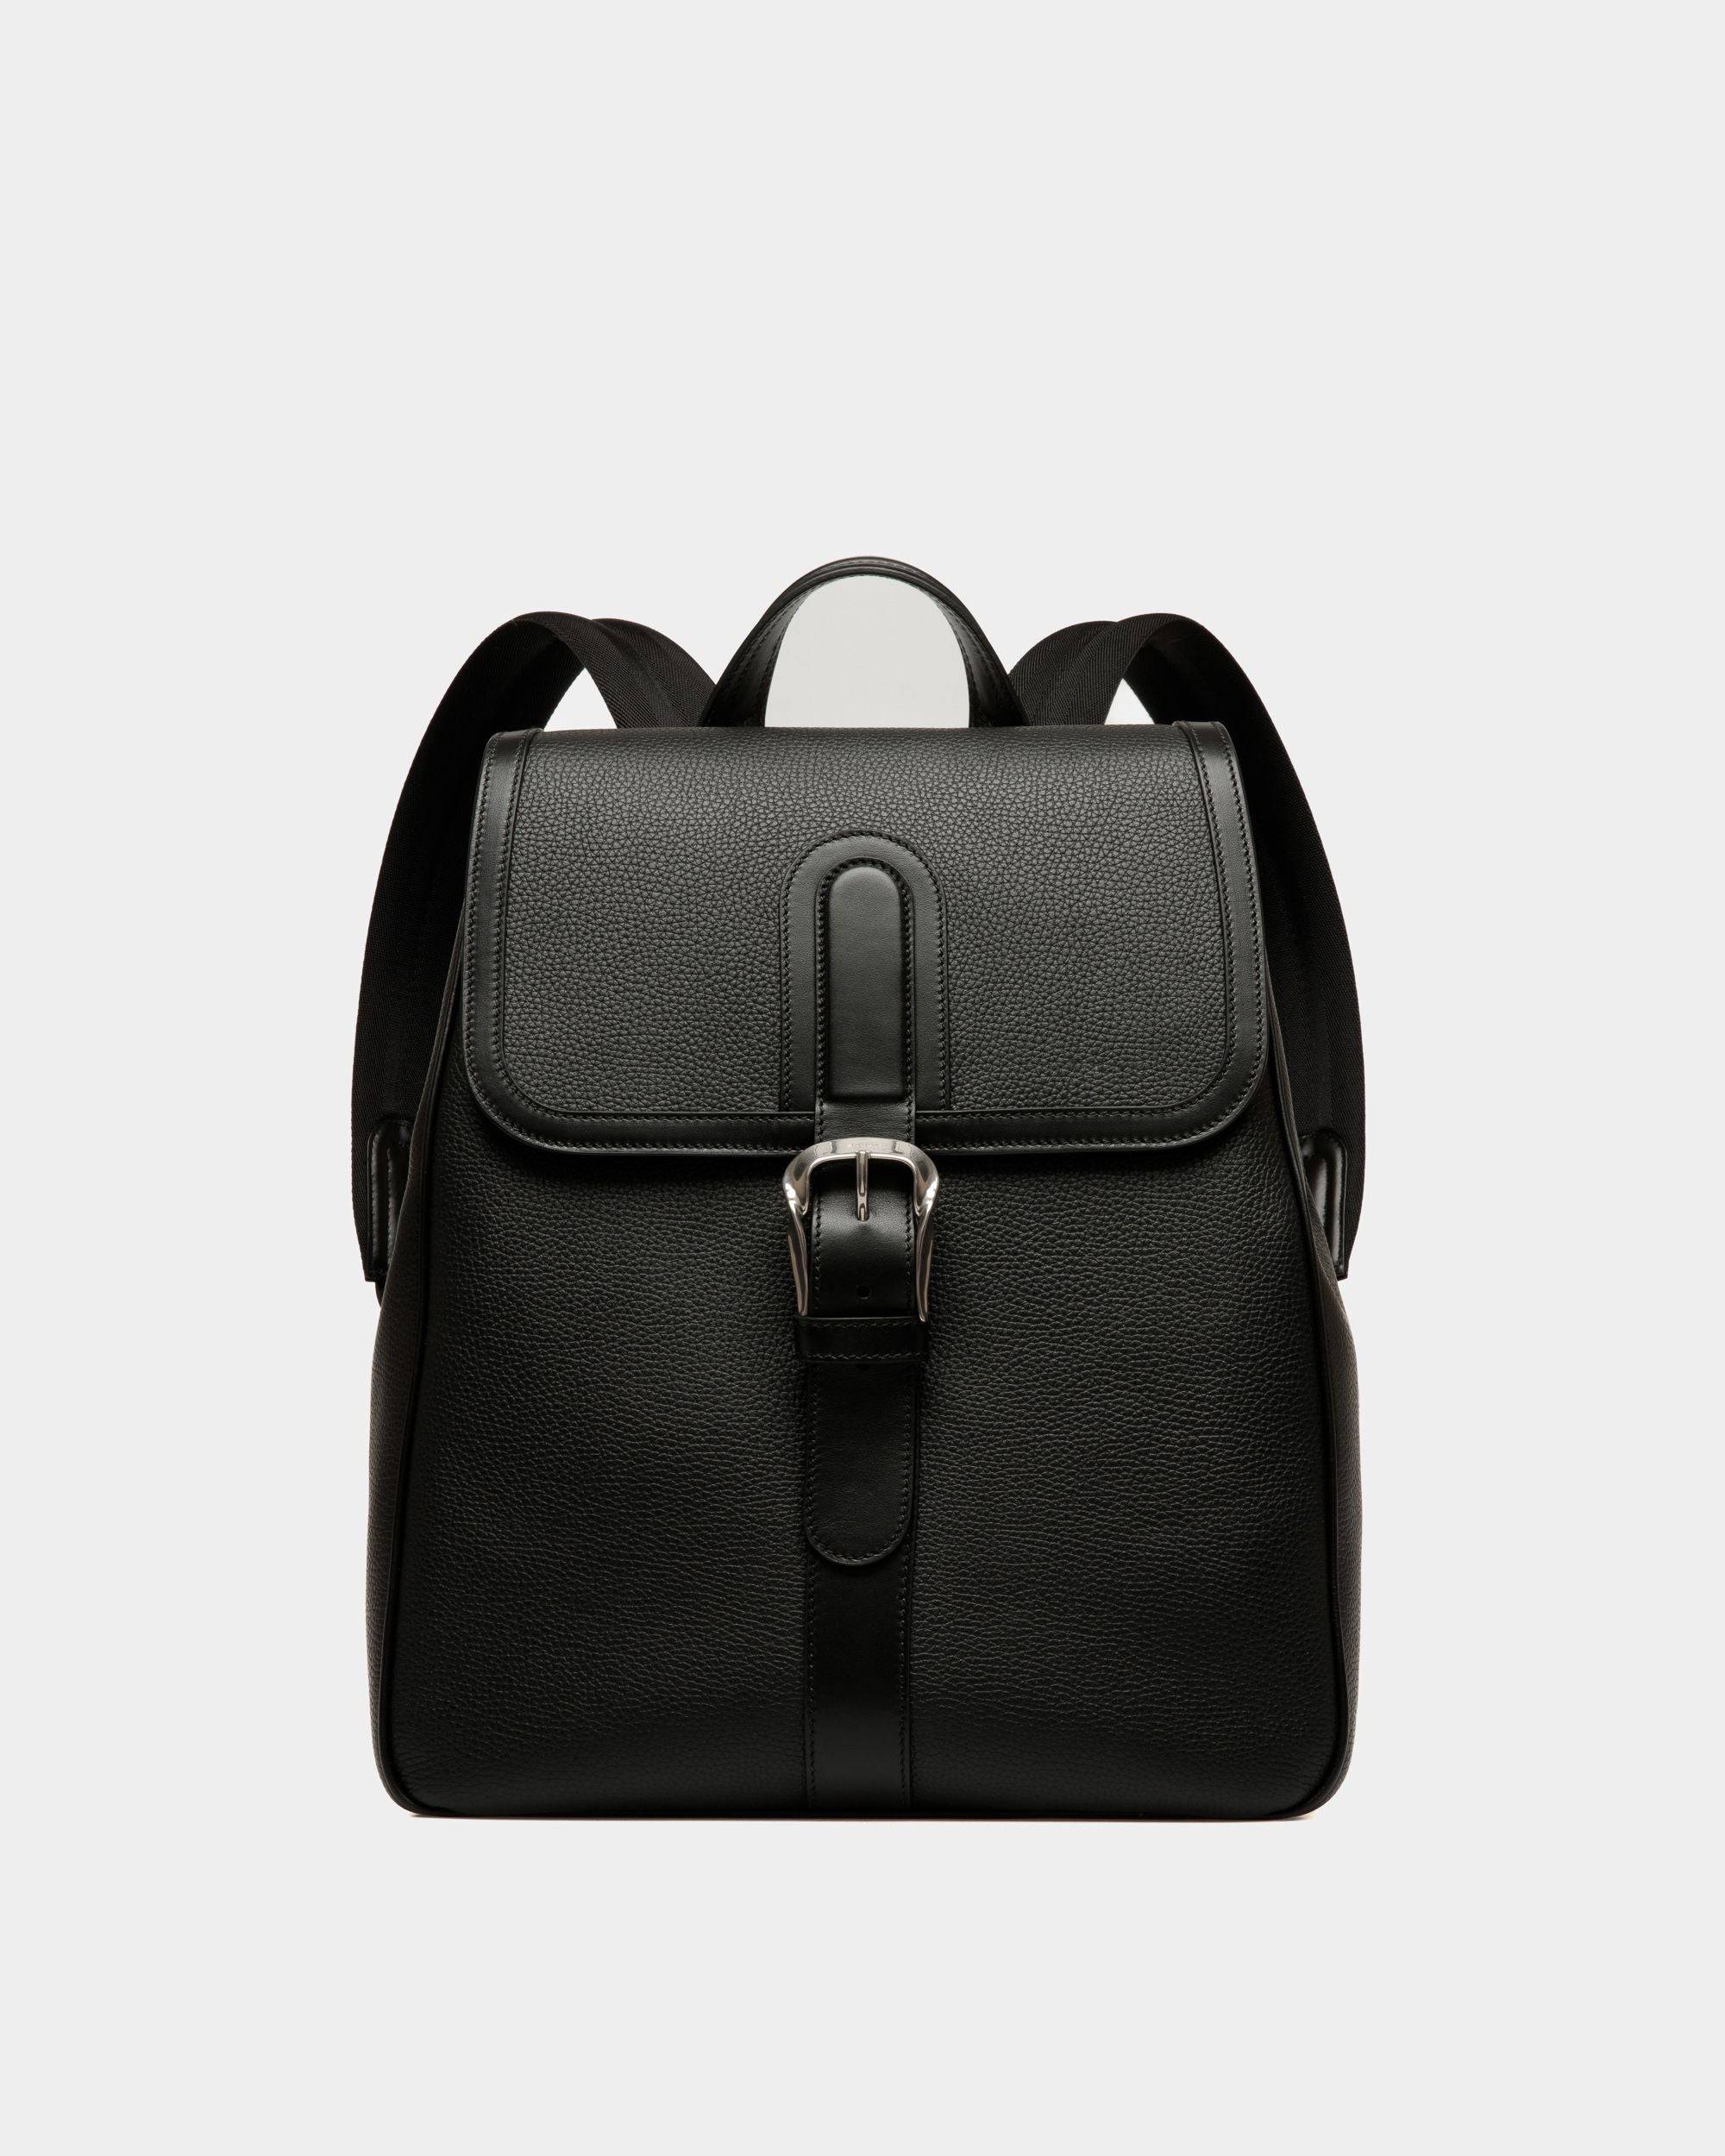 Spin | Men's Backpack in Black Grained Leather | Bally | Still Life Front